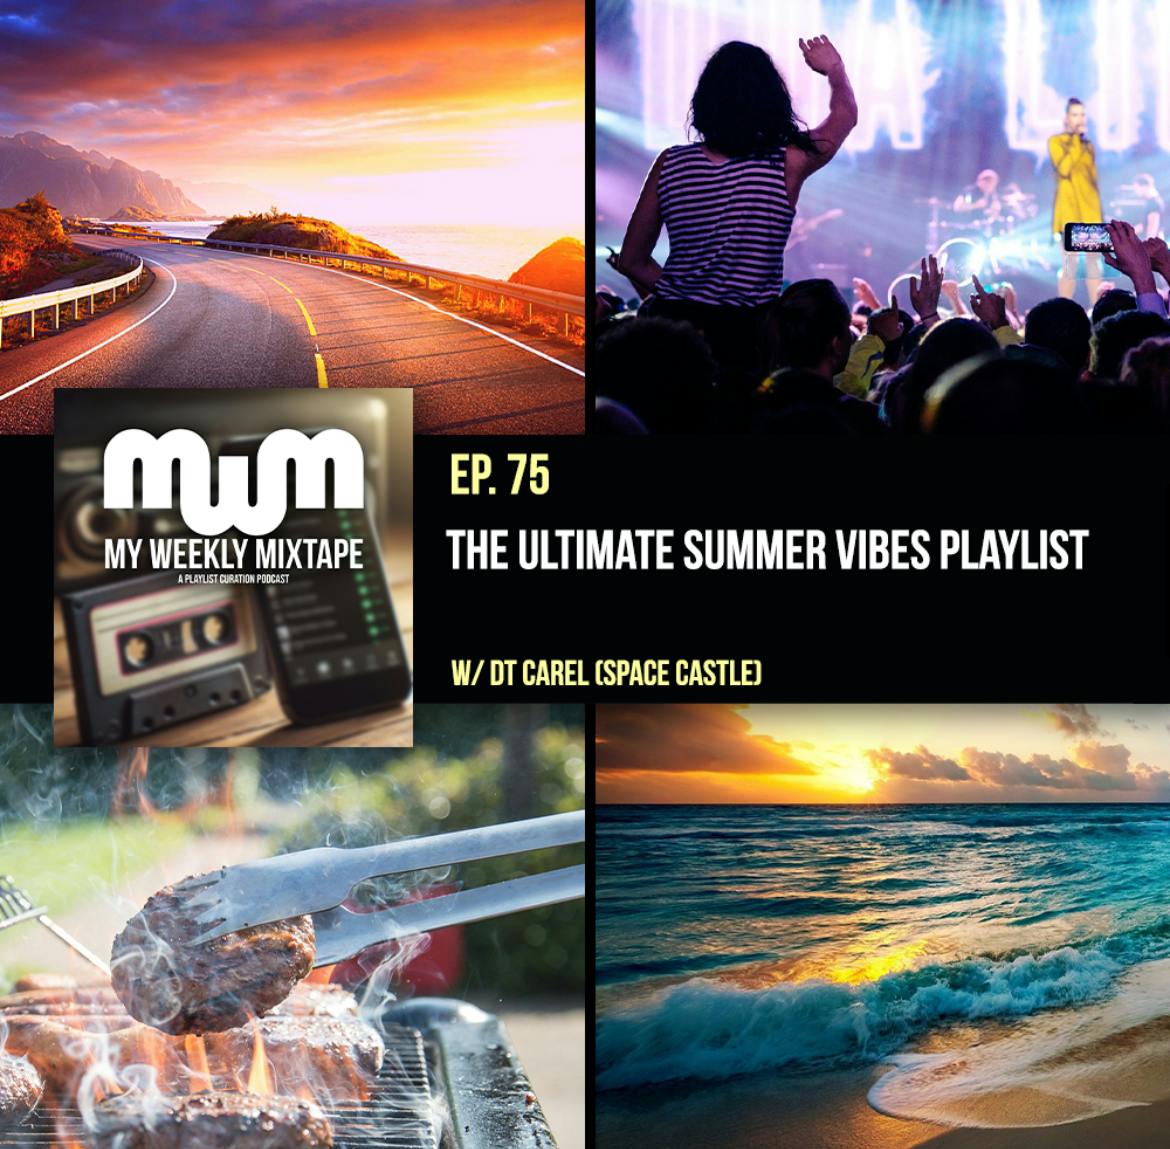 The Ultimate Summer Vibes Playlist (w/ DT Carel of Space Castle)